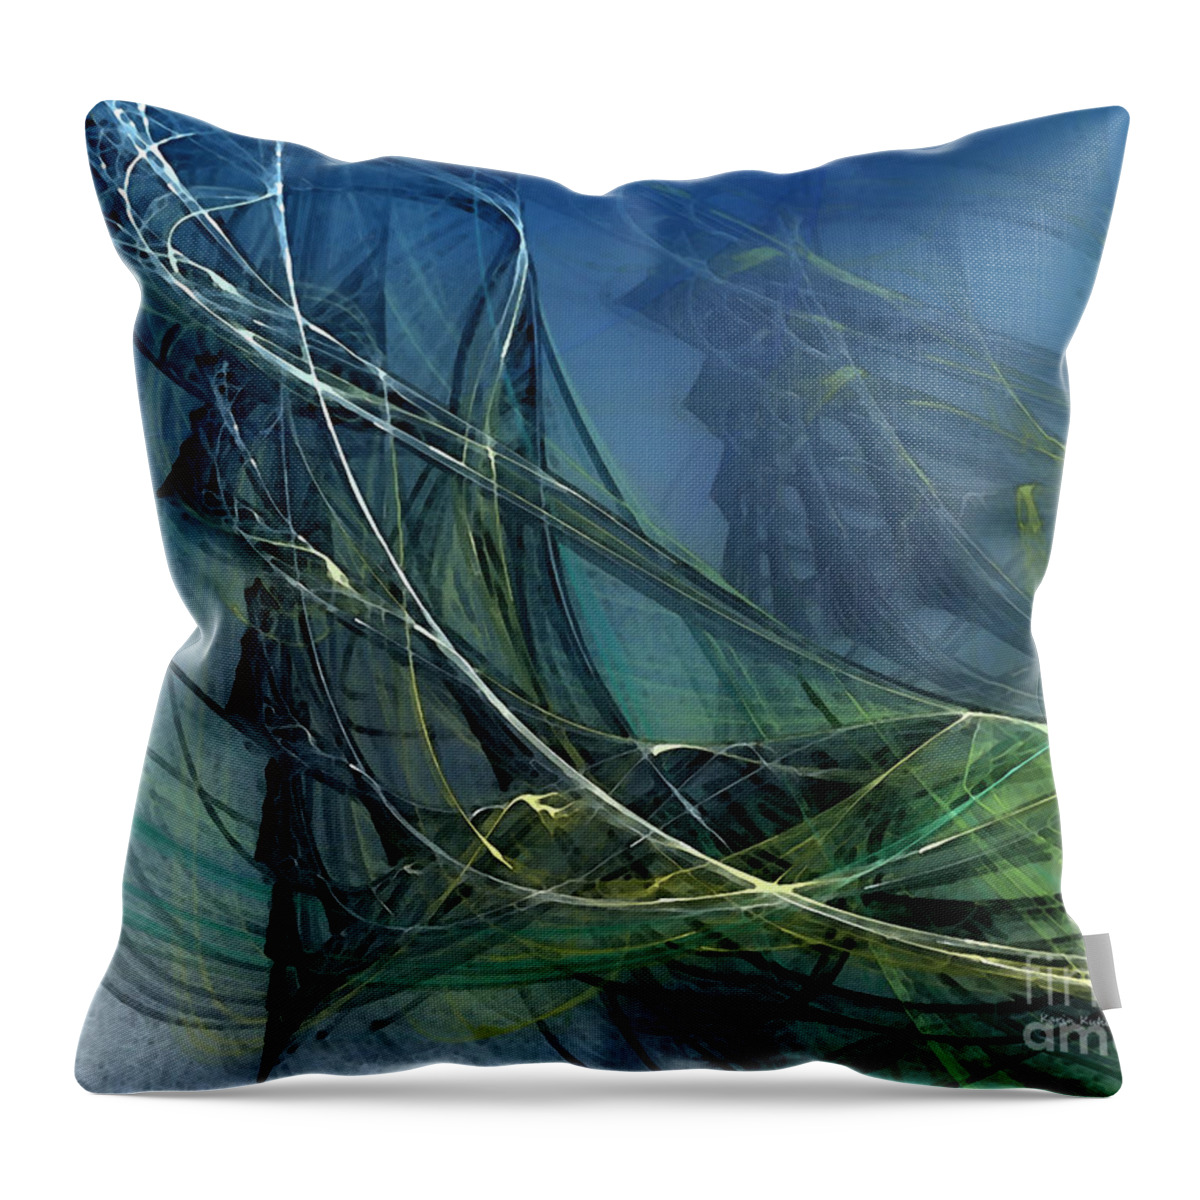 Poetic Throw Pillow featuring the digital art An Echo Of Speed by Karin Kuhlmann